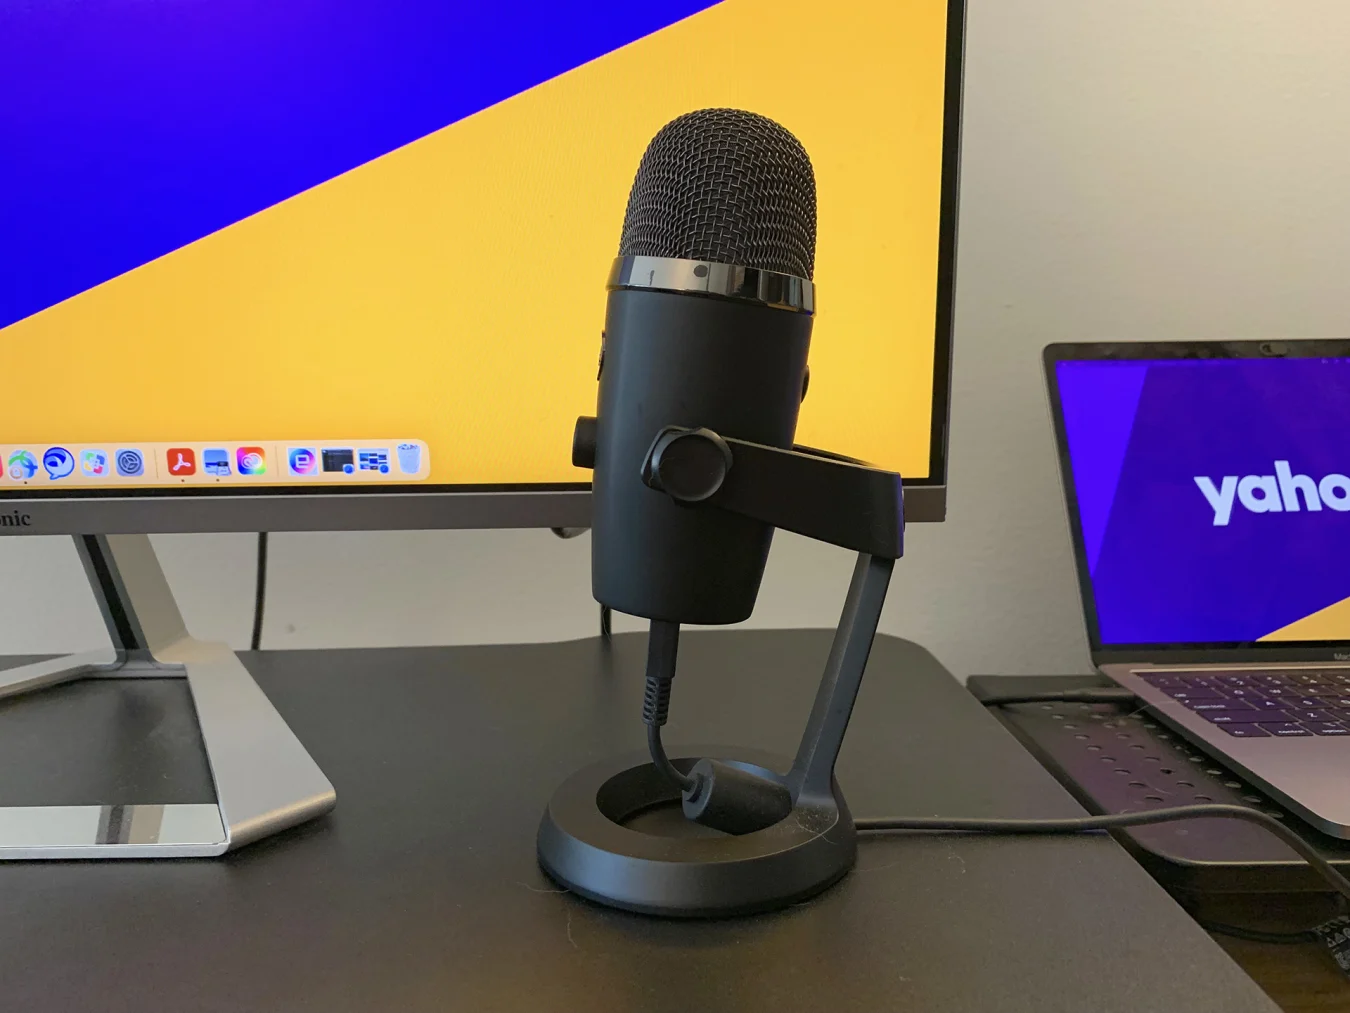 The Blue Yeti Nano Microphone on a black tabletop in front of a laptop and computer monitor.